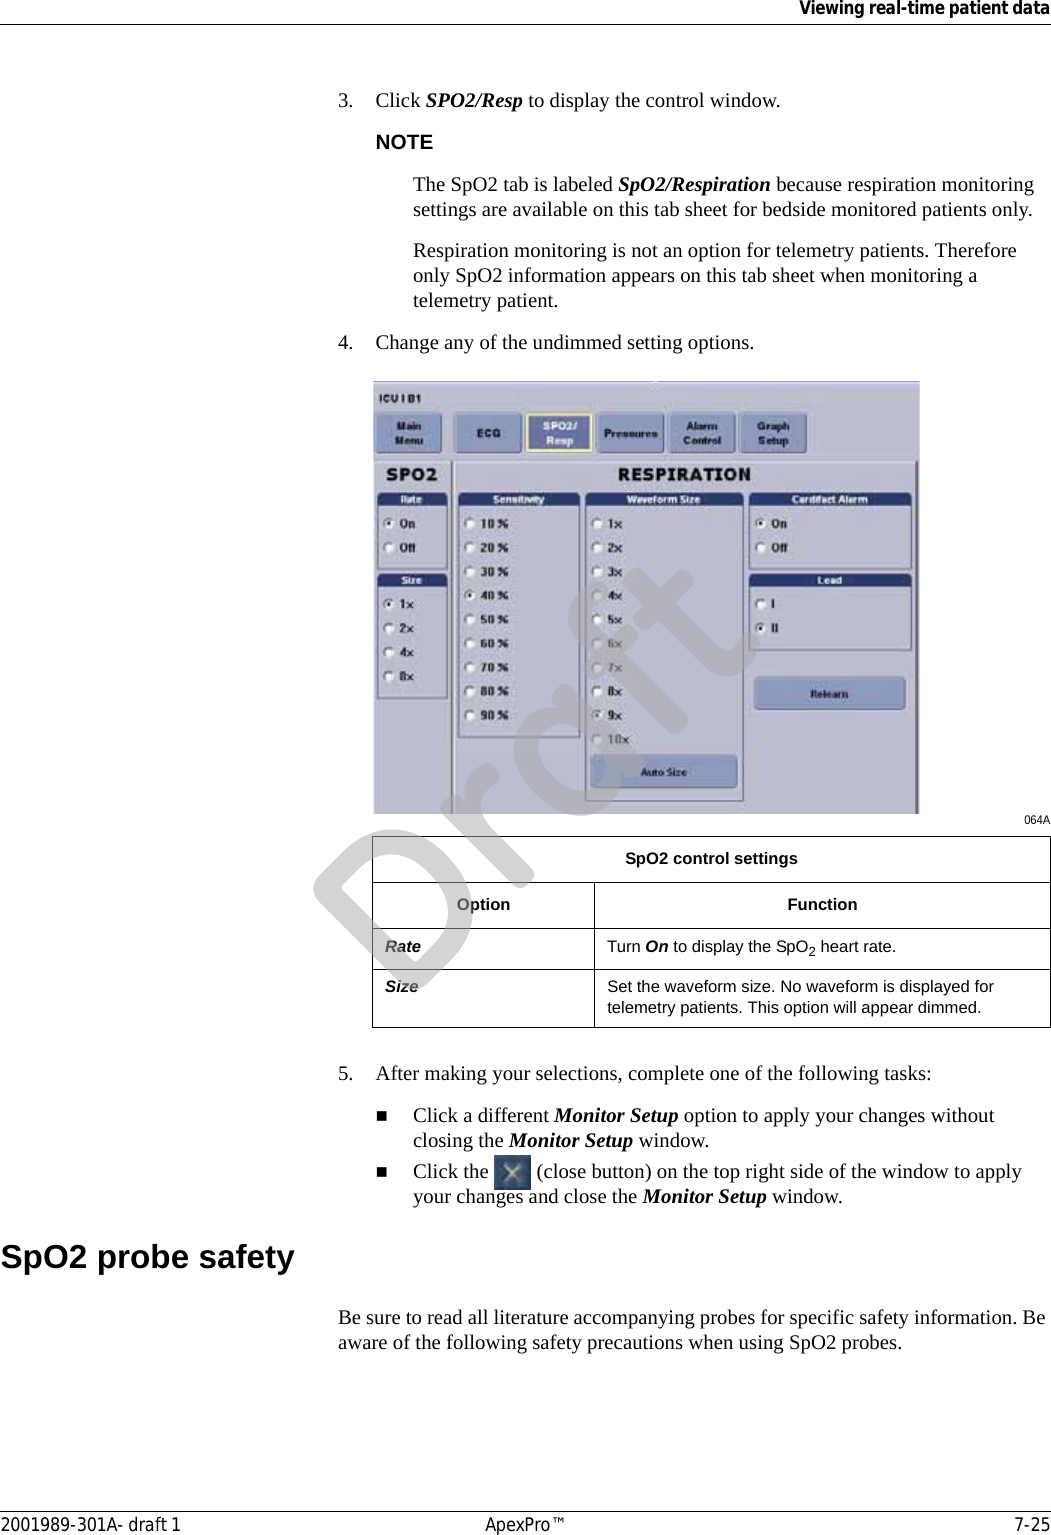 Viewing real-time patient data2001989-301A- draft 1 ApexPro™ 7-253. Click SPO2/Resp to display the control window.NOTEThe SpO2 tab is labeled SpO2/Respiration because respiration monitoring settings are available on this tab sheet for bedside monitored patients only.Respiration monitoring is not an option for telemetry patients. Therefore only SpO2 information appears on this tab sheet when monitoring a telemetry patient.4. Change any of the undimmed setting options. 064A5. After making your selections, complete one of the following tasks:Click a different Monitor Setup option to apply your changes without closing the Monitor Setup window.Click the   (close button) on the top right side of the window to apply your changes and close the Monitor Setup window.SpO2 probe safetyBe sure to read all literature accompanying probes for specific safety information. Be aware of the following safety precautions when using SpO2 probes.SpO2 control settingsOption FunctionRate Turn On to display the SpO2 heart rate.Size Set the waveform size. No waveform is displayed for telemetry patients. This option will appear dimmed.Draft